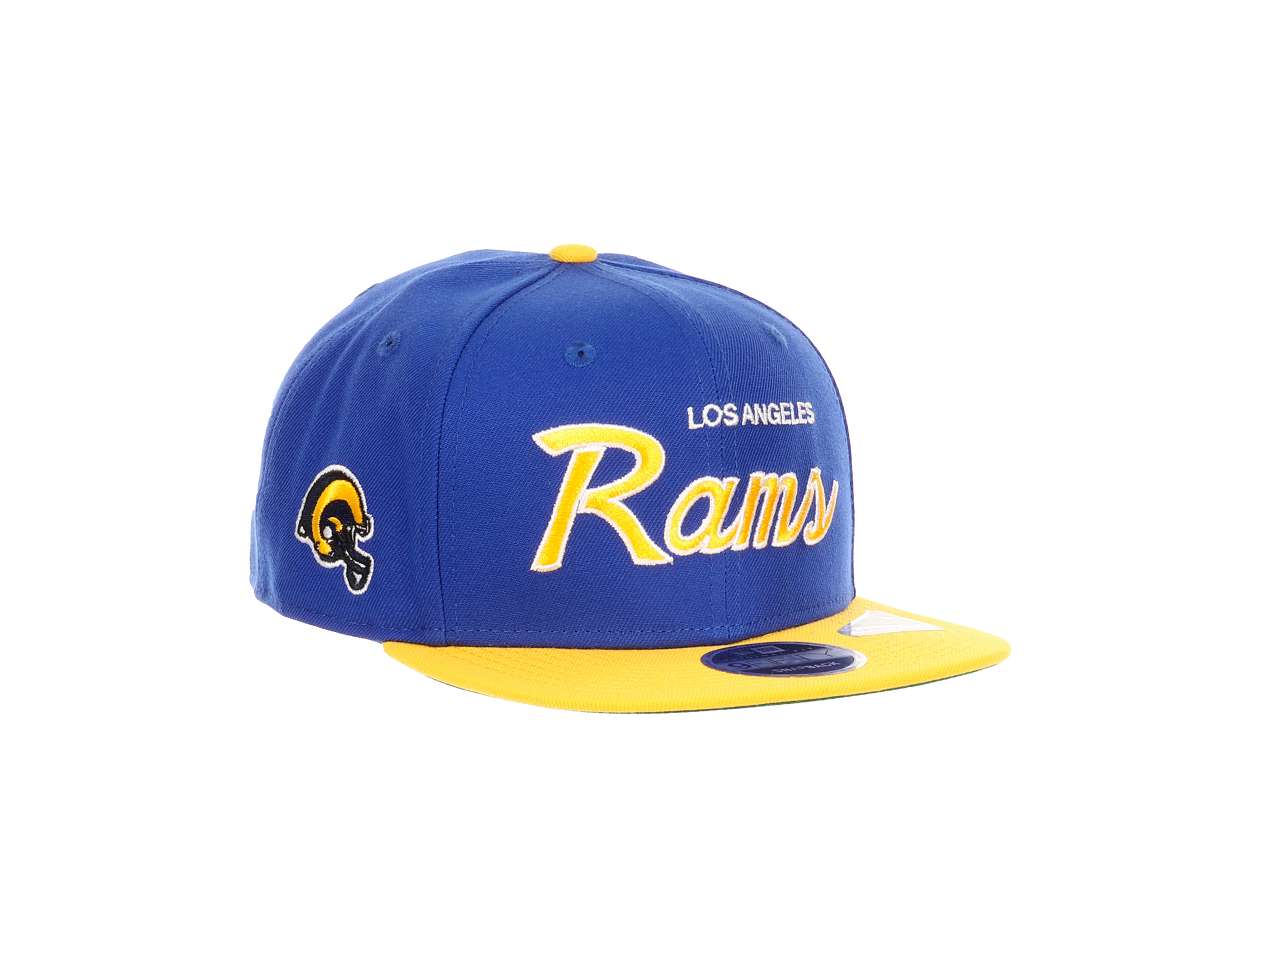 Los Angeles Rams NFLMajestic Blue Rams Sidepatch 9Fifty Original Fit Snapback Cap New Era